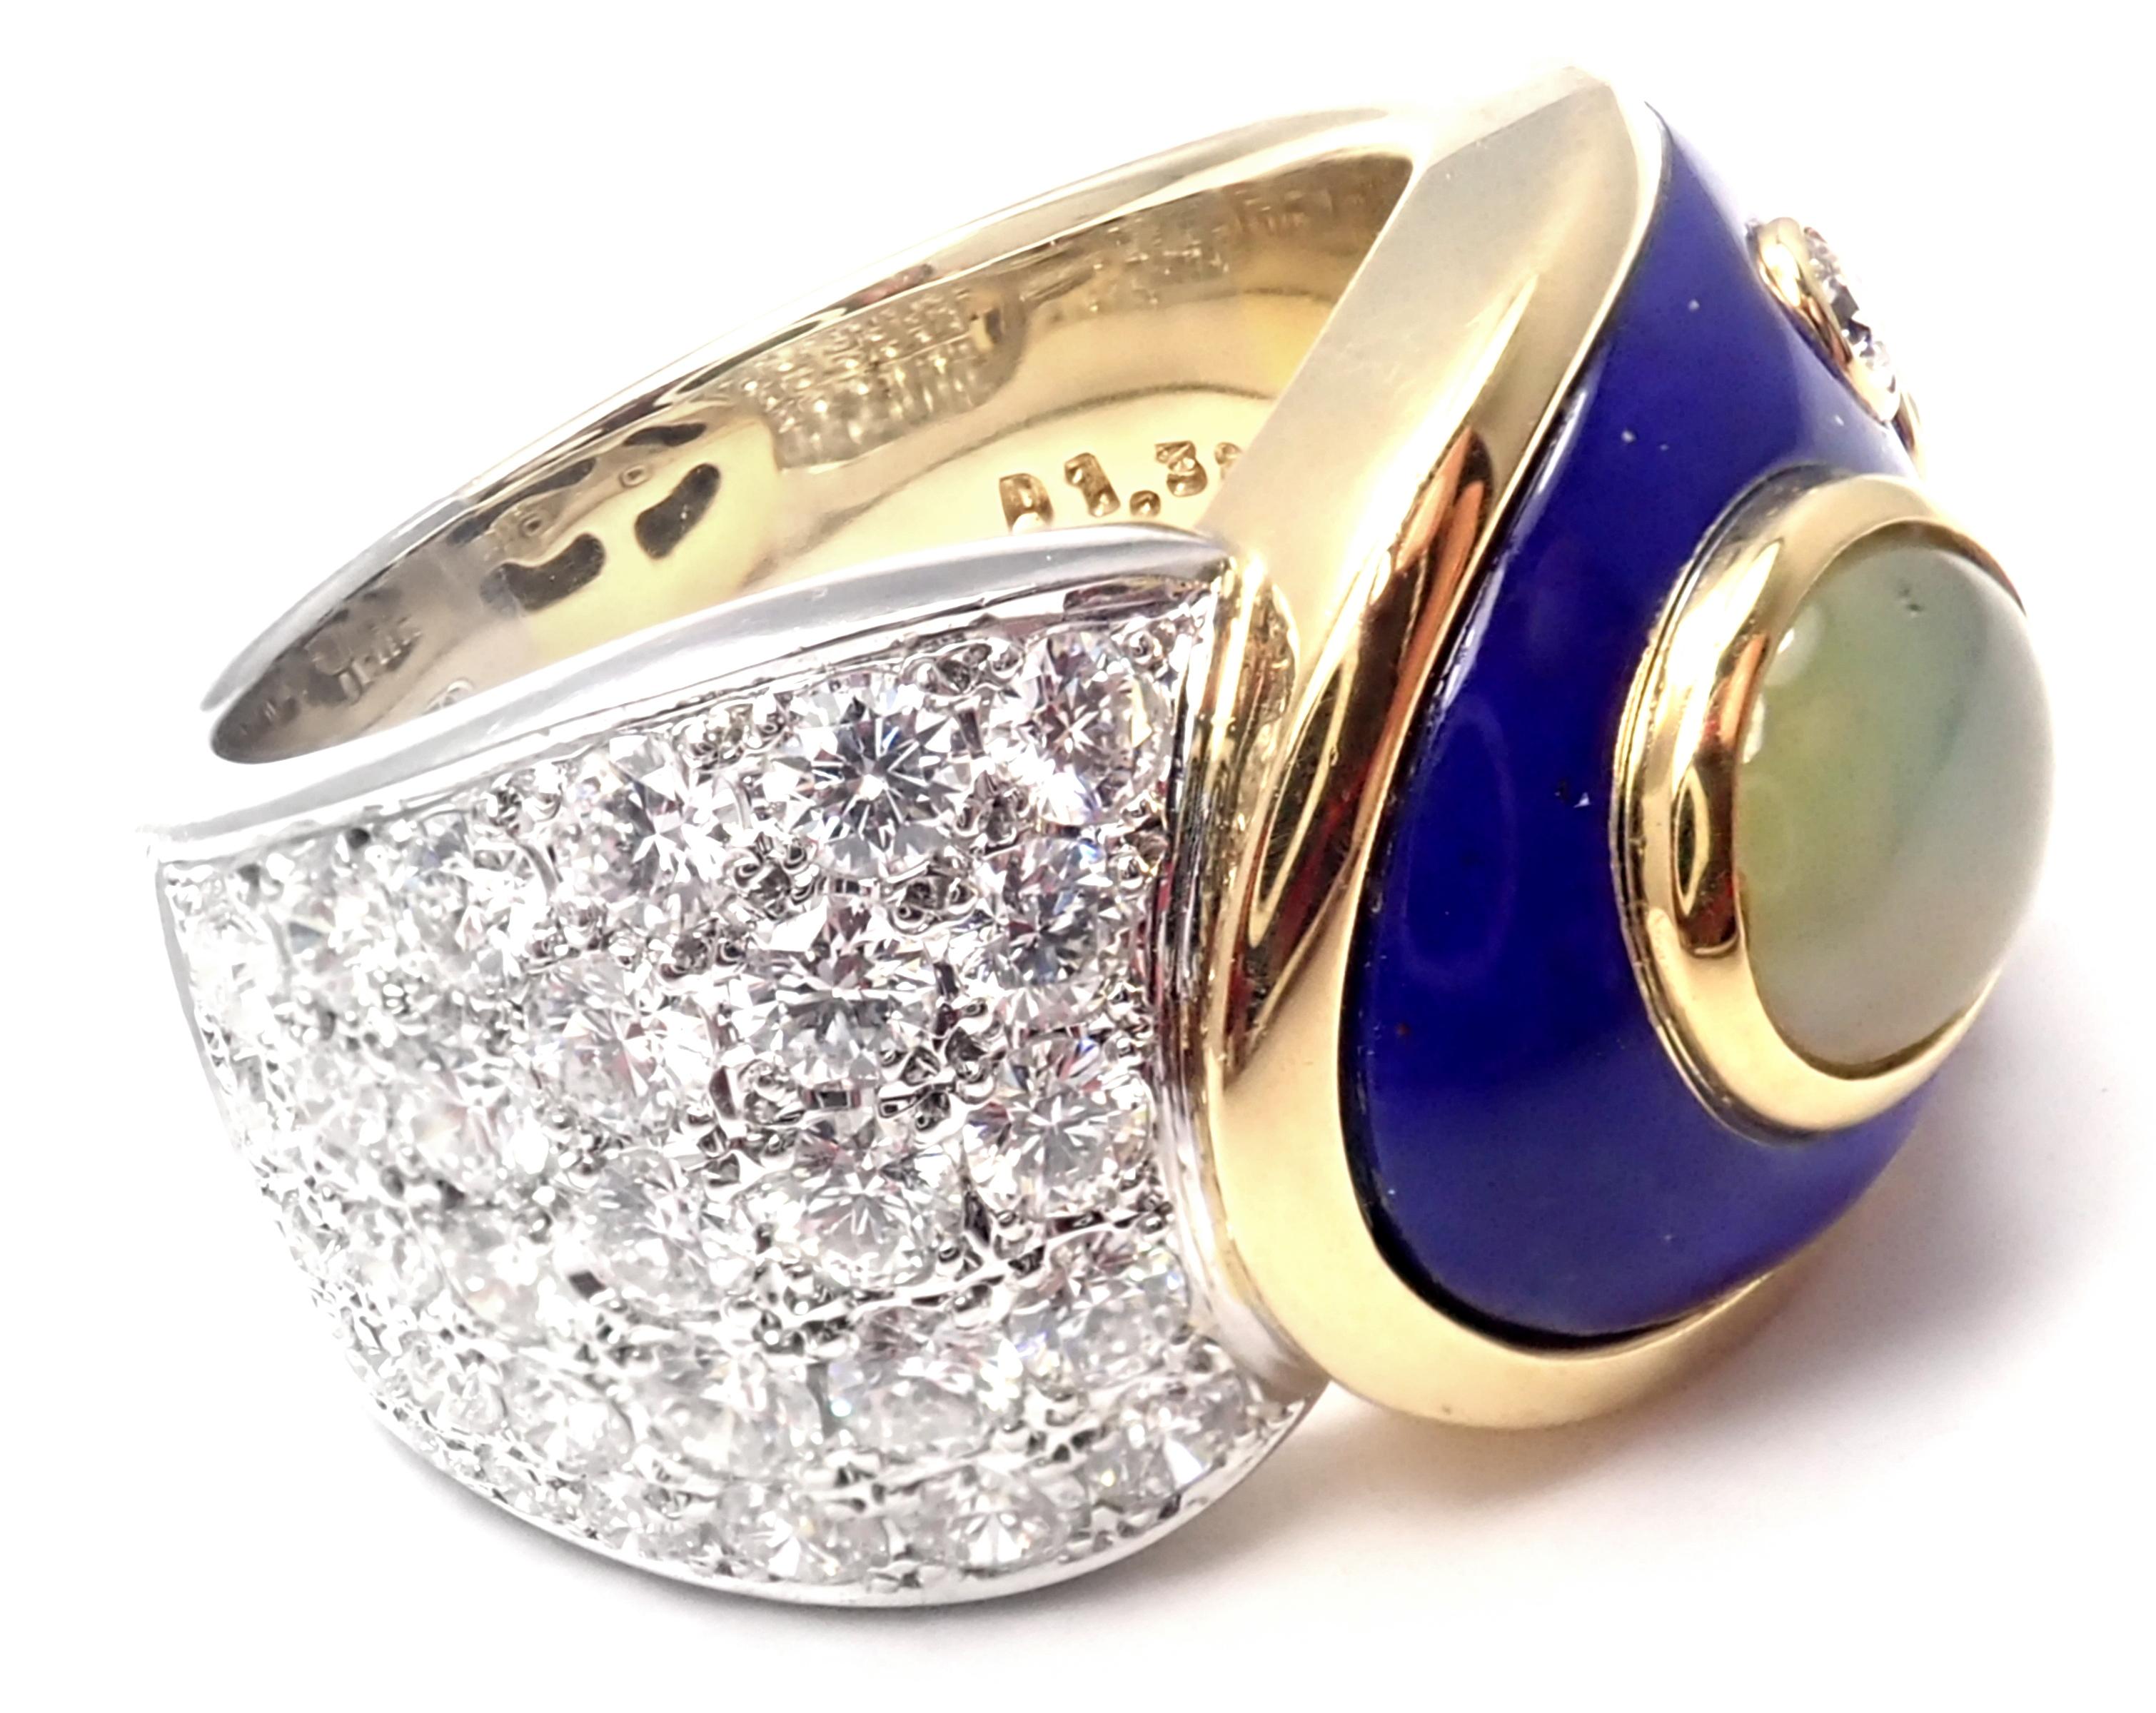 Platinum And 18k White Gold Diamond Cats Eye Blue Enamel Band Ring by Mikimoto. 
With Diamonds VS1 clarity, G color total weight approximately .3.45ct
1 Cat's Eye 7mm x 9mm
Details: 
Ring Size: 7
Weight: 23.4 grams
Width: 15mm
Stamped Hallmarks: